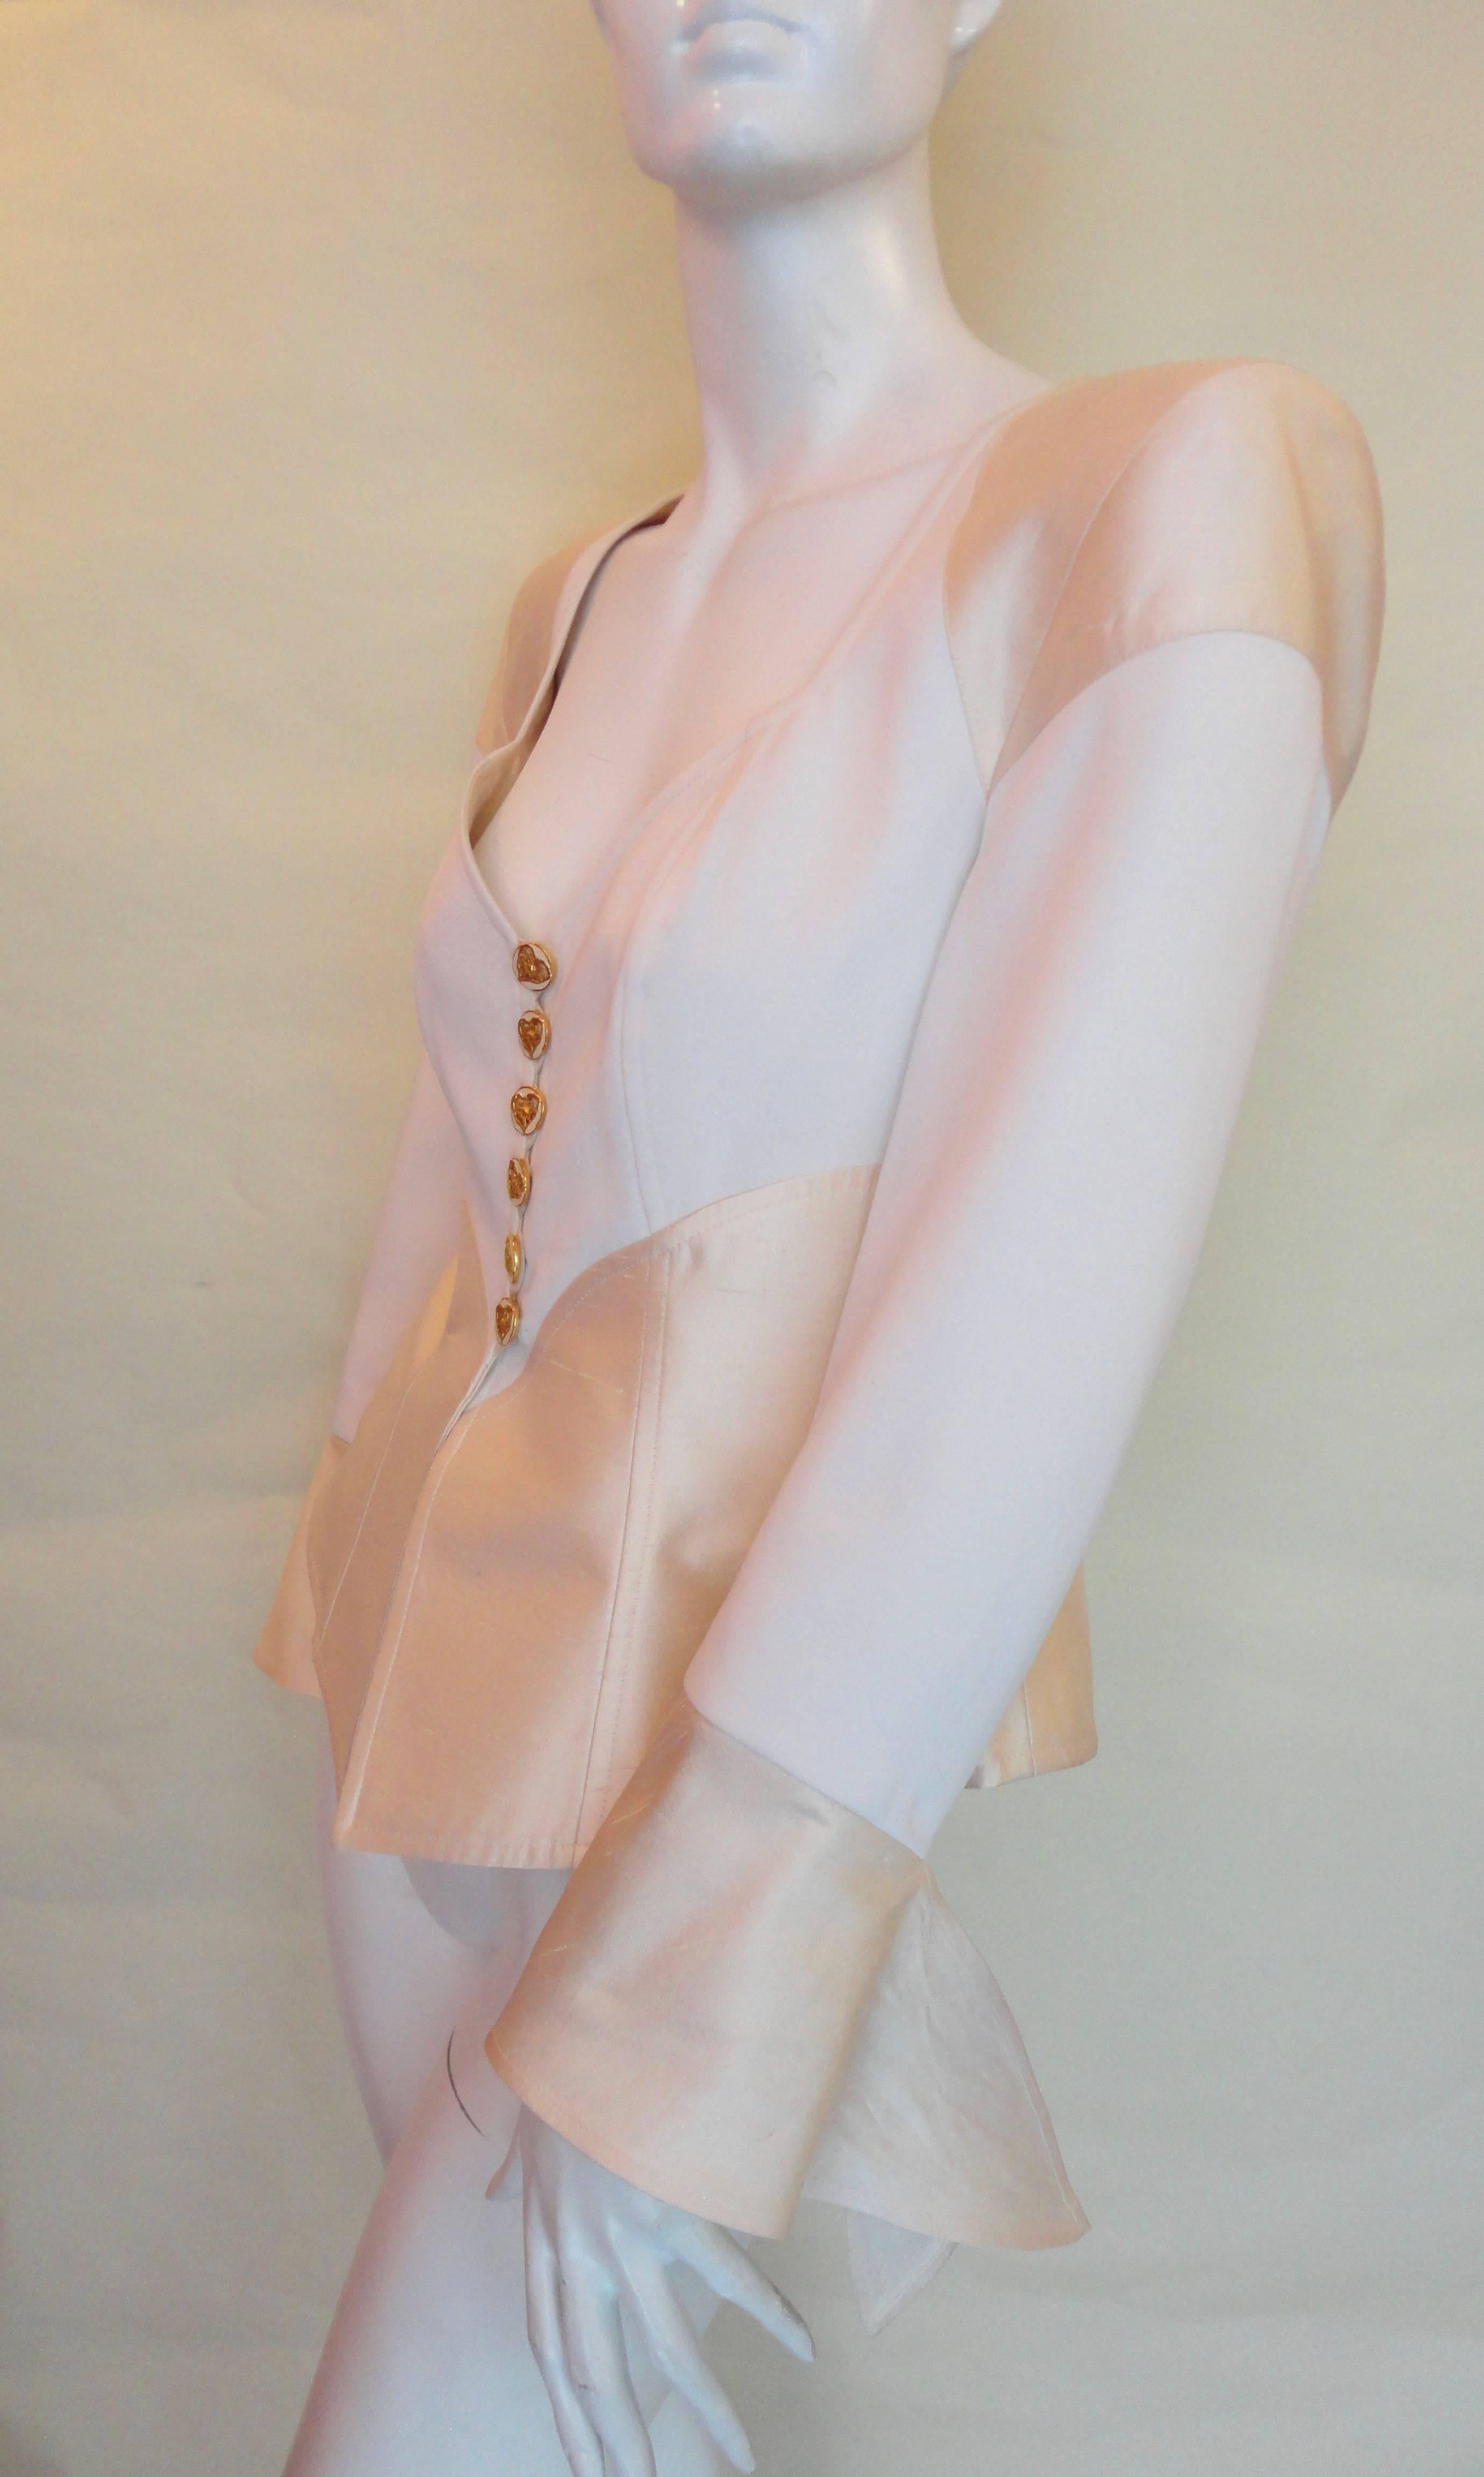 Christian Lacroix white and beije silk jacket, with heart shape neckline. Beautiful flower detail buttons.
Very good condition, not showing any signs of wear. 
Shoulder 43 cms
Sleeve 56 cms